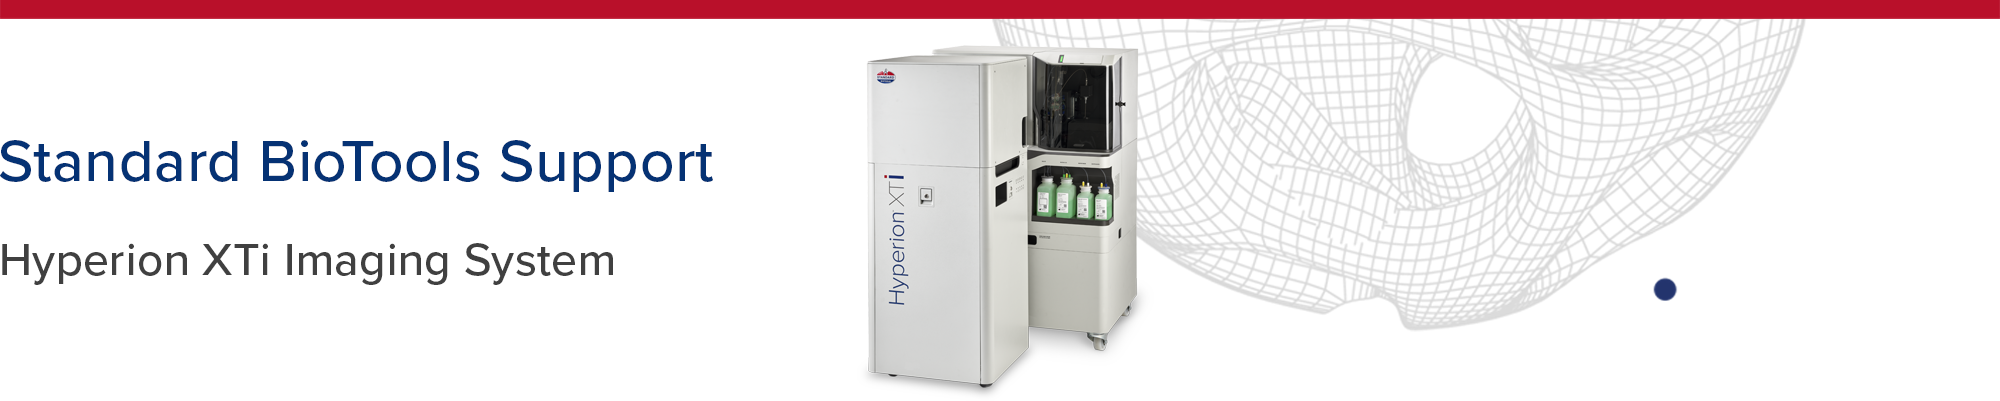 Standard BioTools Support - Hyperion XTi Imaging System 